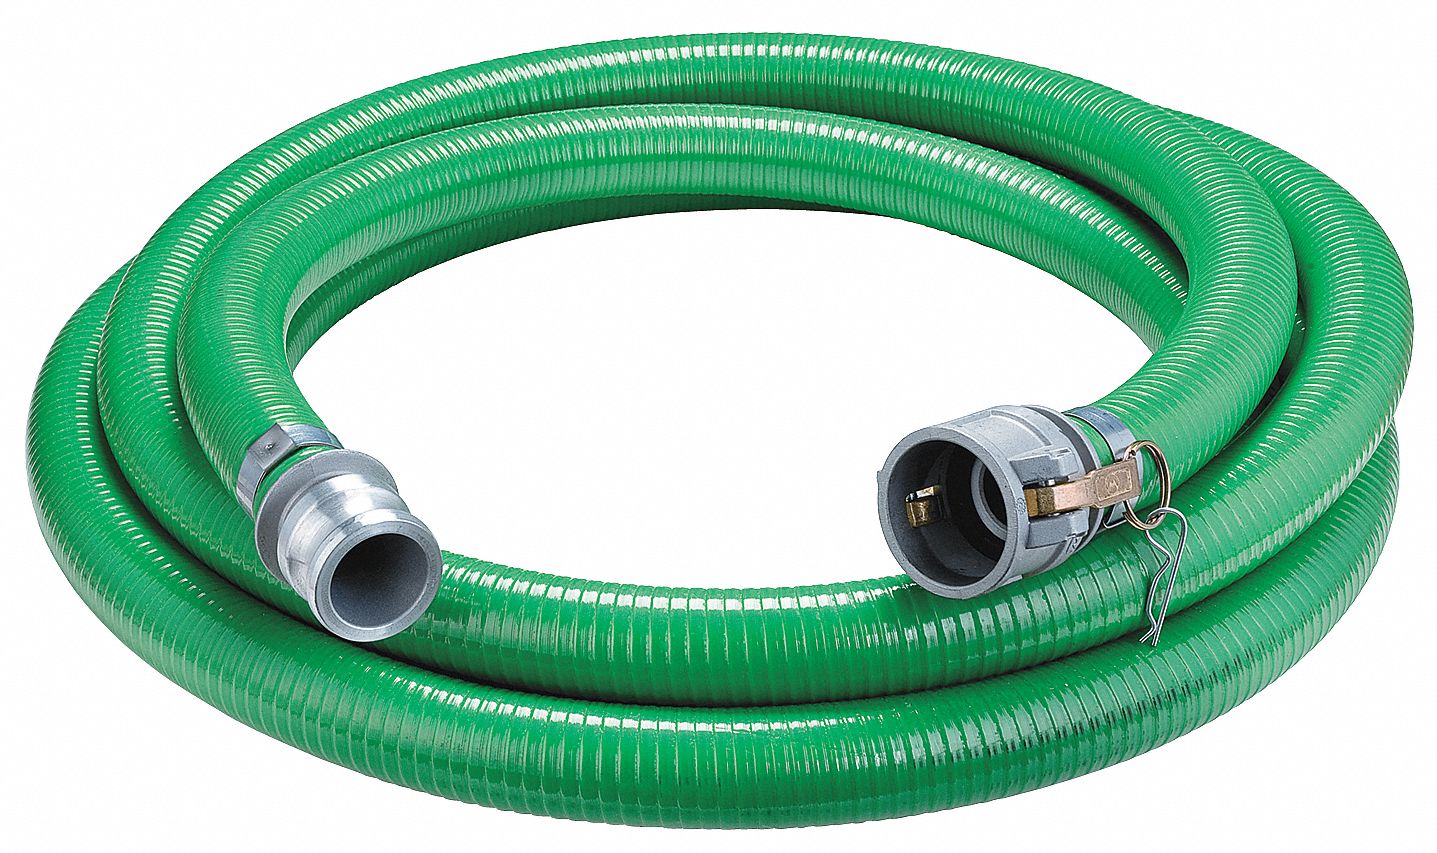 Suction hose 2" Delivery Pump Drainage 7 Bar 1M 1 Metre 52mm Green Medium Duty 